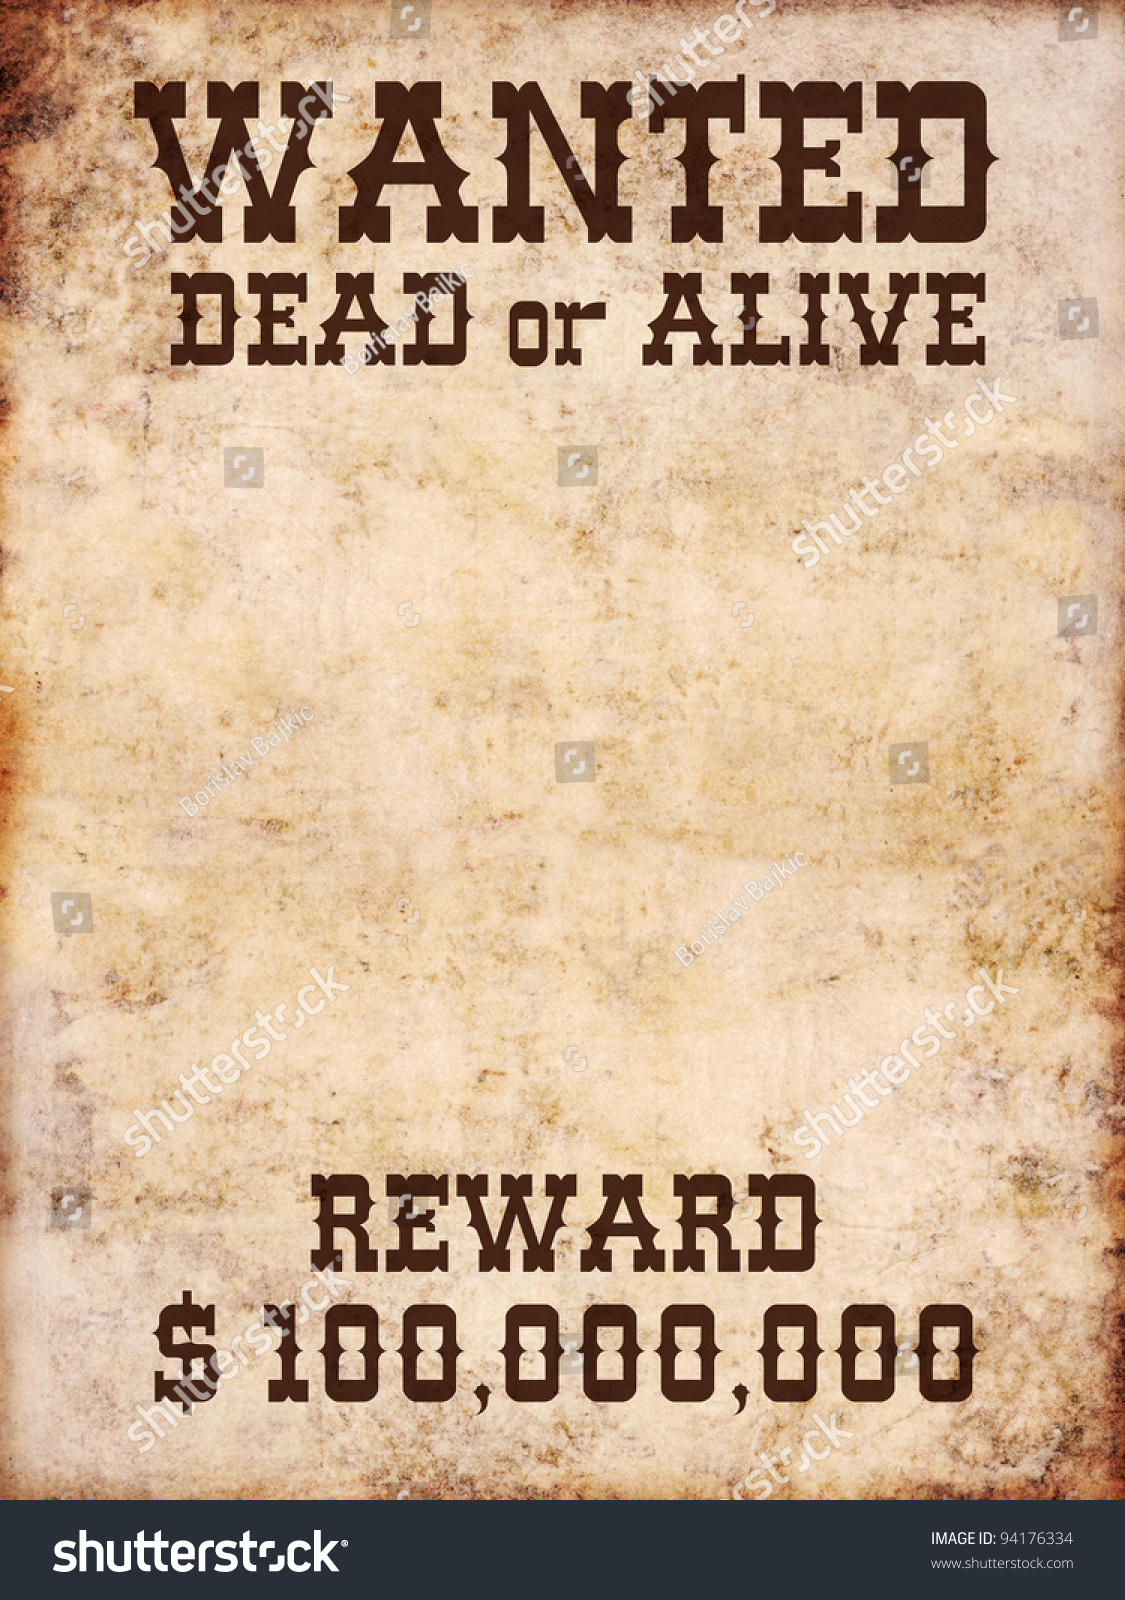 Wanted Poster Dead Or Alive Stock Photo 94176334 Shutterstock